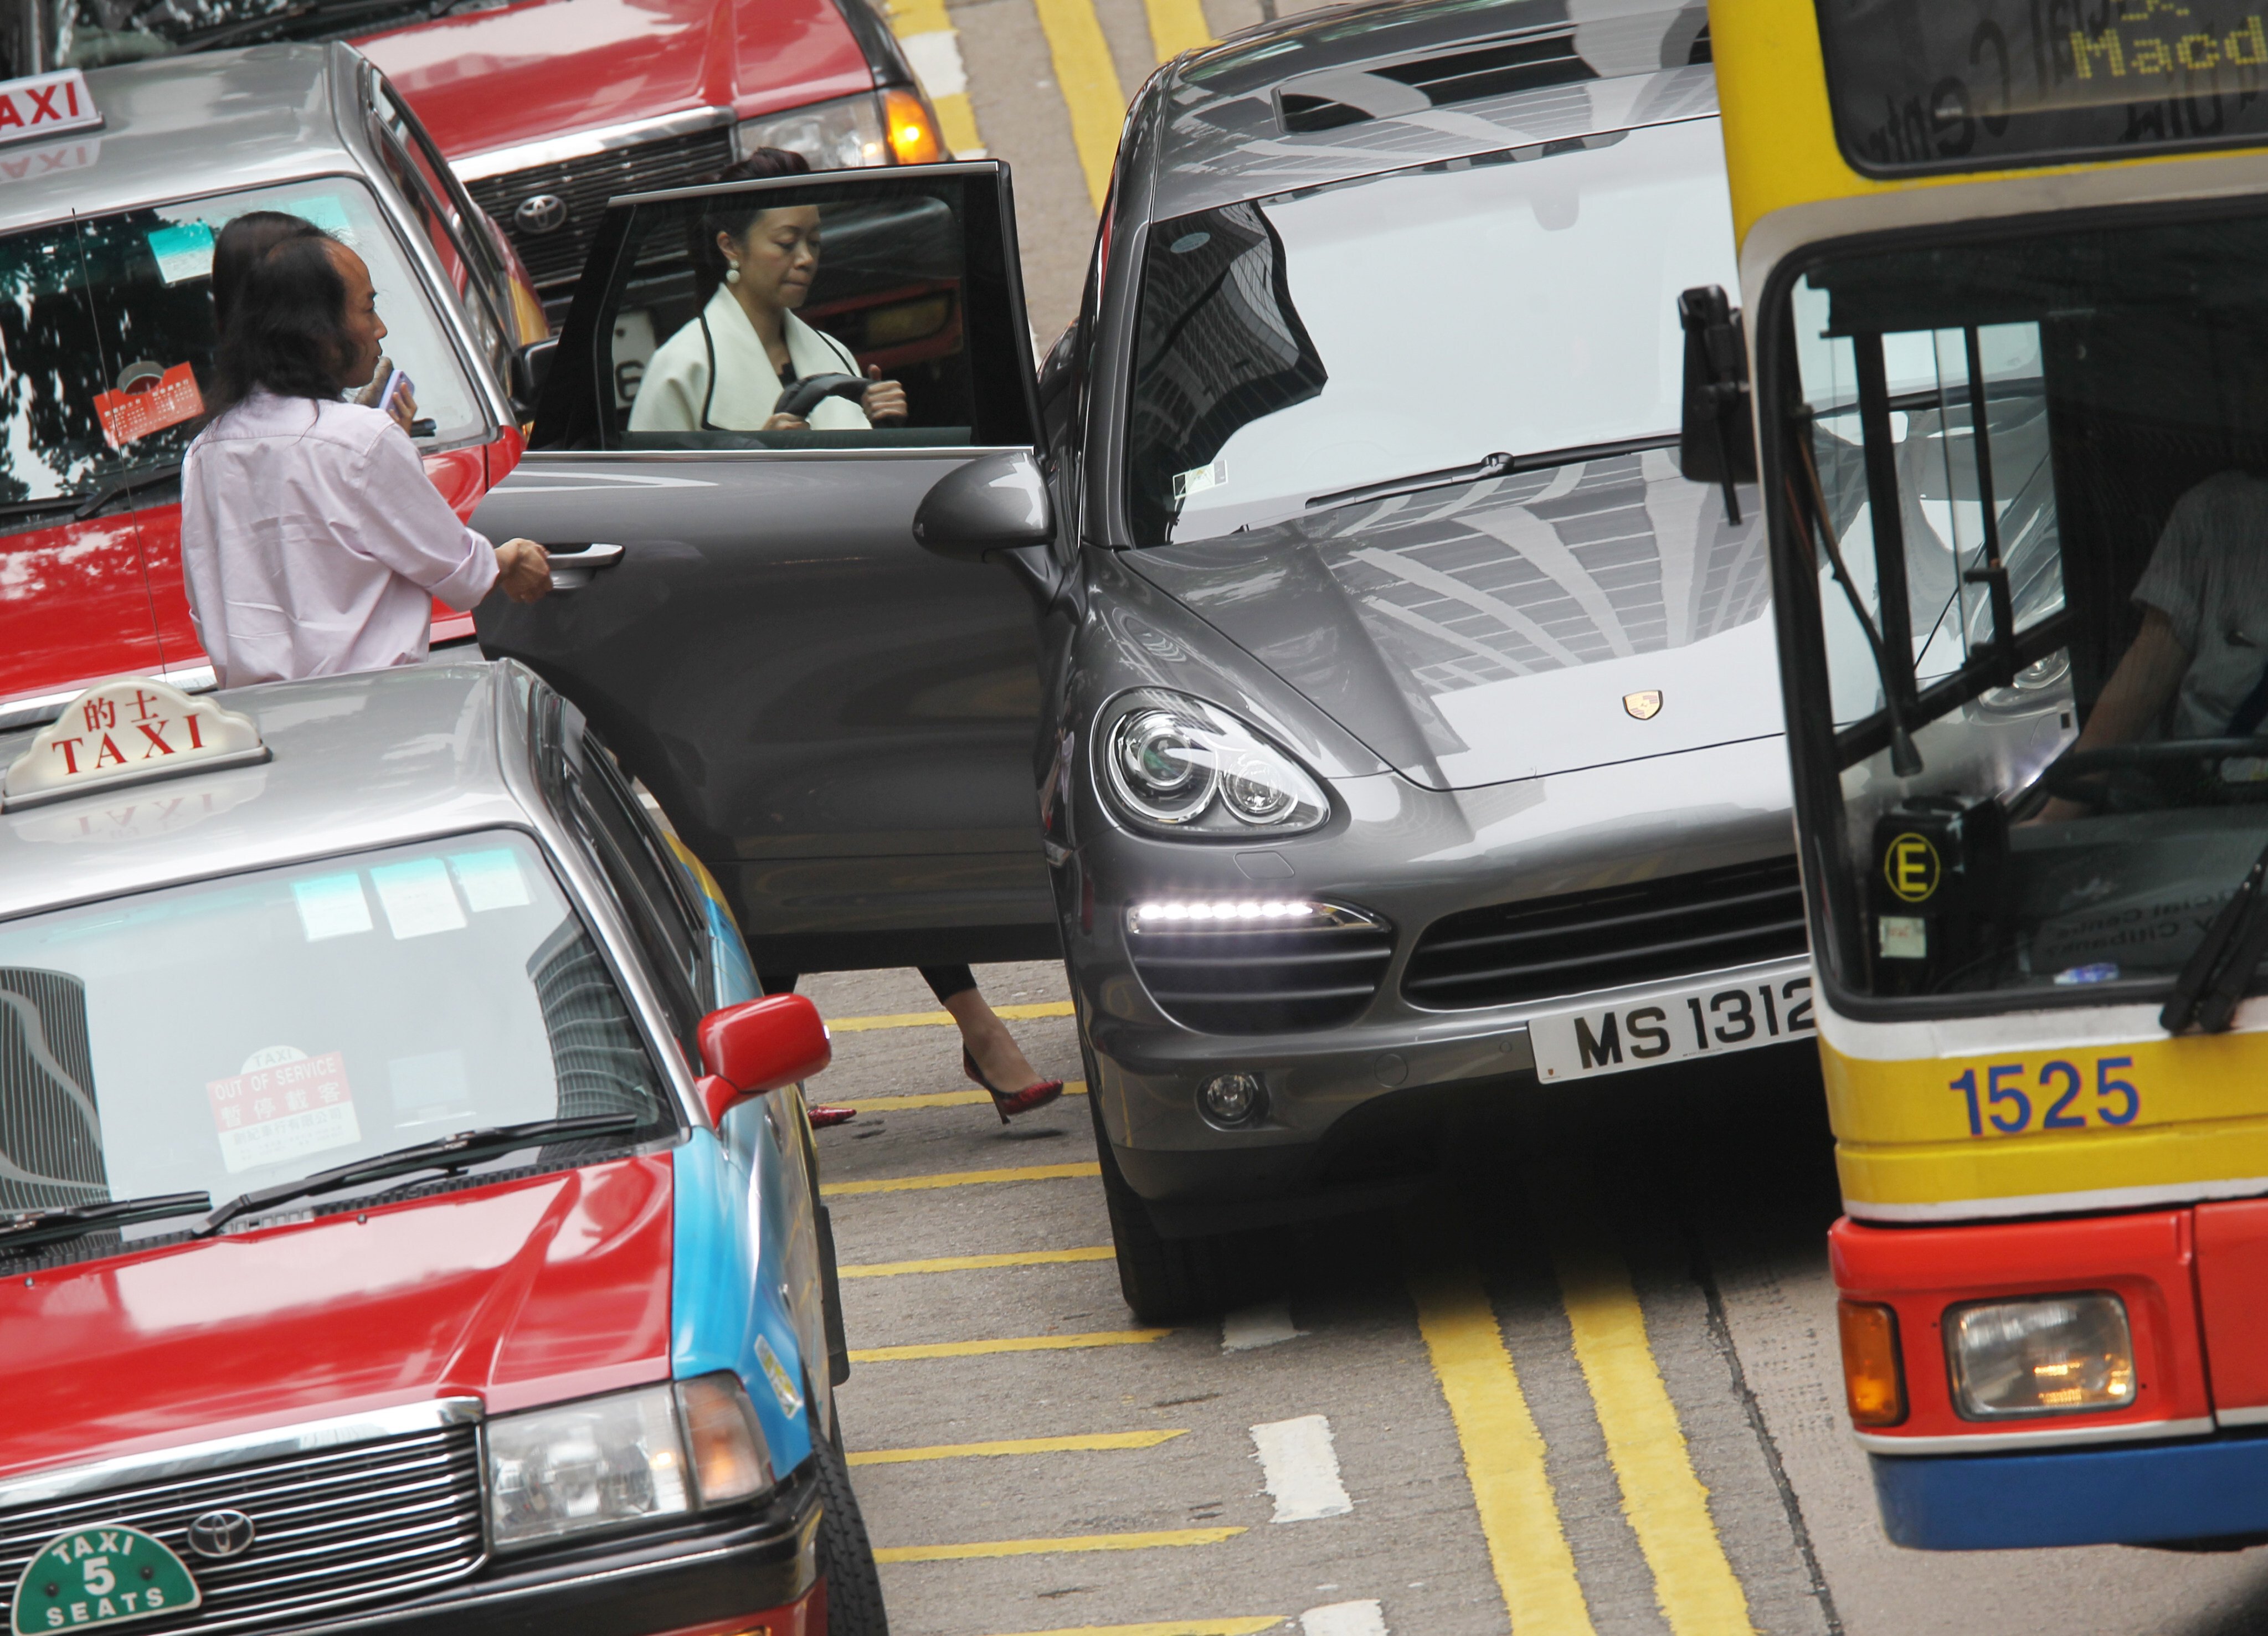 Some Hong Kong drivers show skills that can’t be taught in a regular driving school. From bad parking to speeding and dangerous lane changing, anything goes. Photo: SCMP